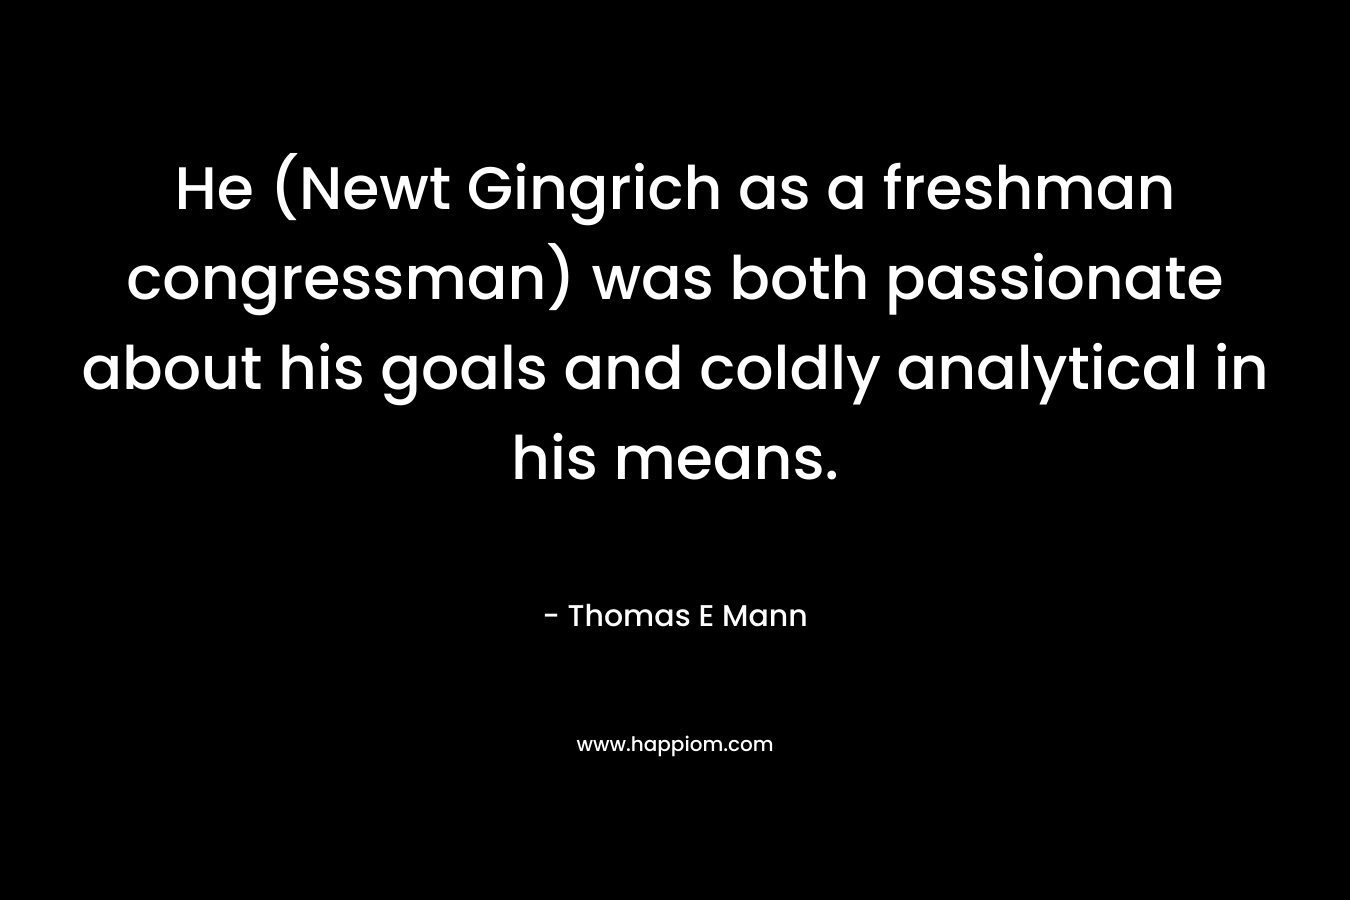 He (Newt Gingrich as a freshman congressman) was both passionate about his goals and coldly analytical in his means. – Thomas E Mann